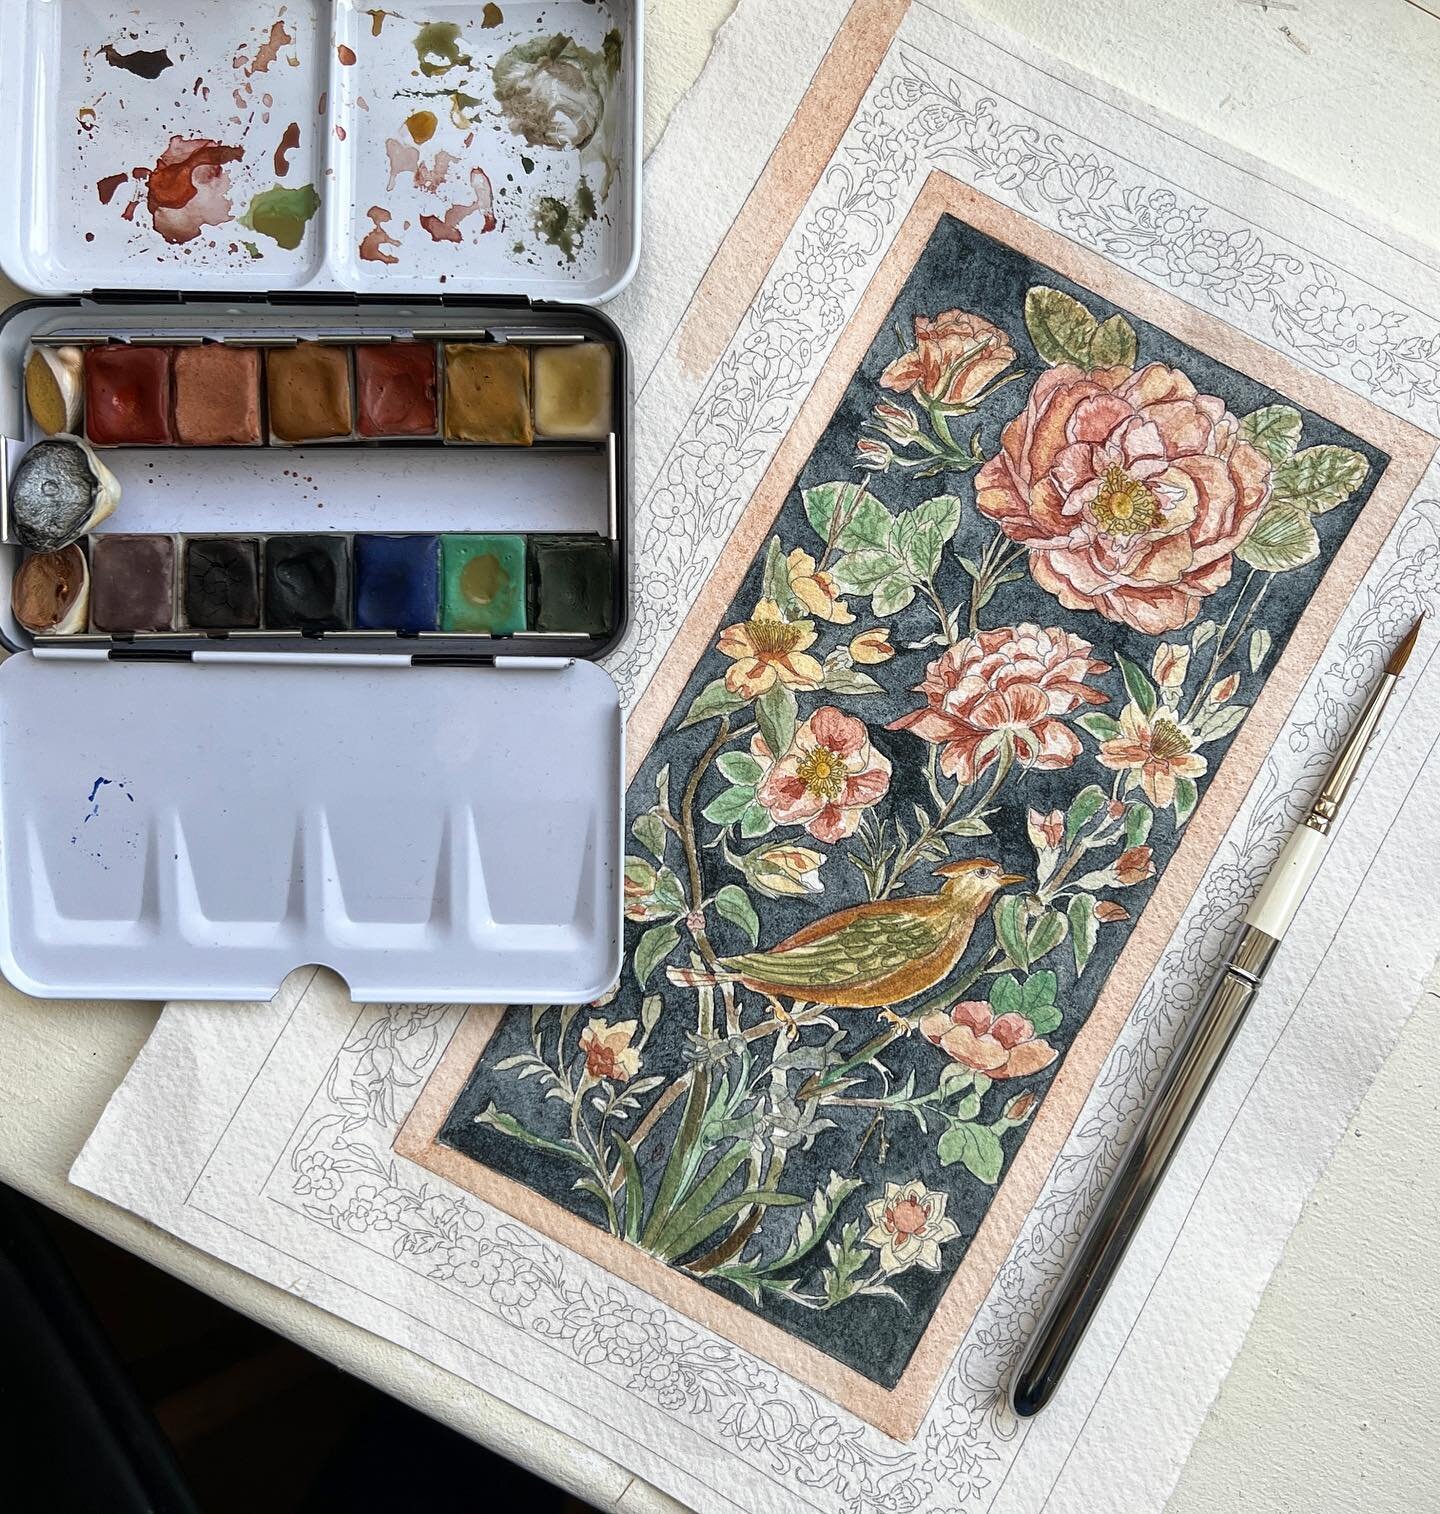 We are studying this lovely pattern at #theilluminationclub this month, which comes from a Persian manuscript and this style is called gul wa bolbol meaning rose and bird. Painting this was challenging and we tried to follow the basics of botanical p